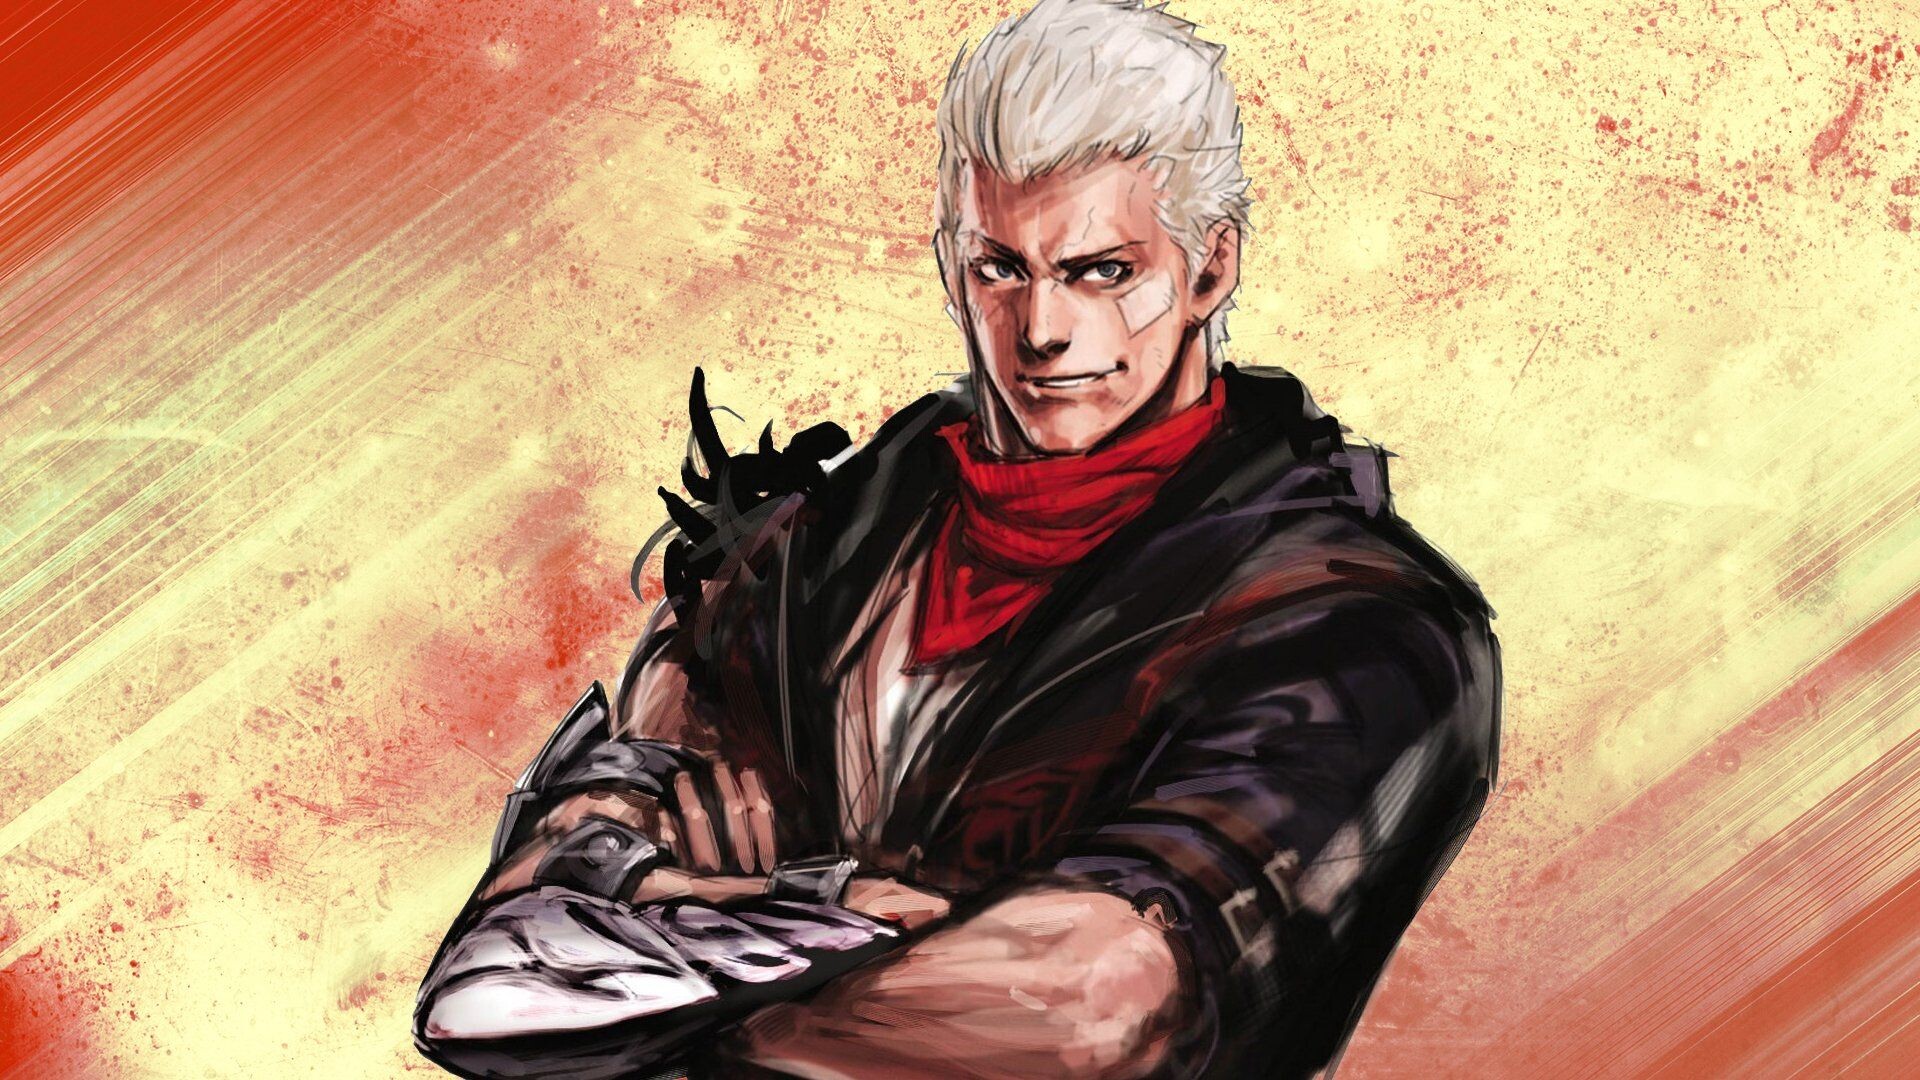 God Hand (Game): Gene, A 23-year-old fighter on a mission to defeat the Four Devas, A 3D beat 'em. 1920x1080 Full HD Wallpaper.